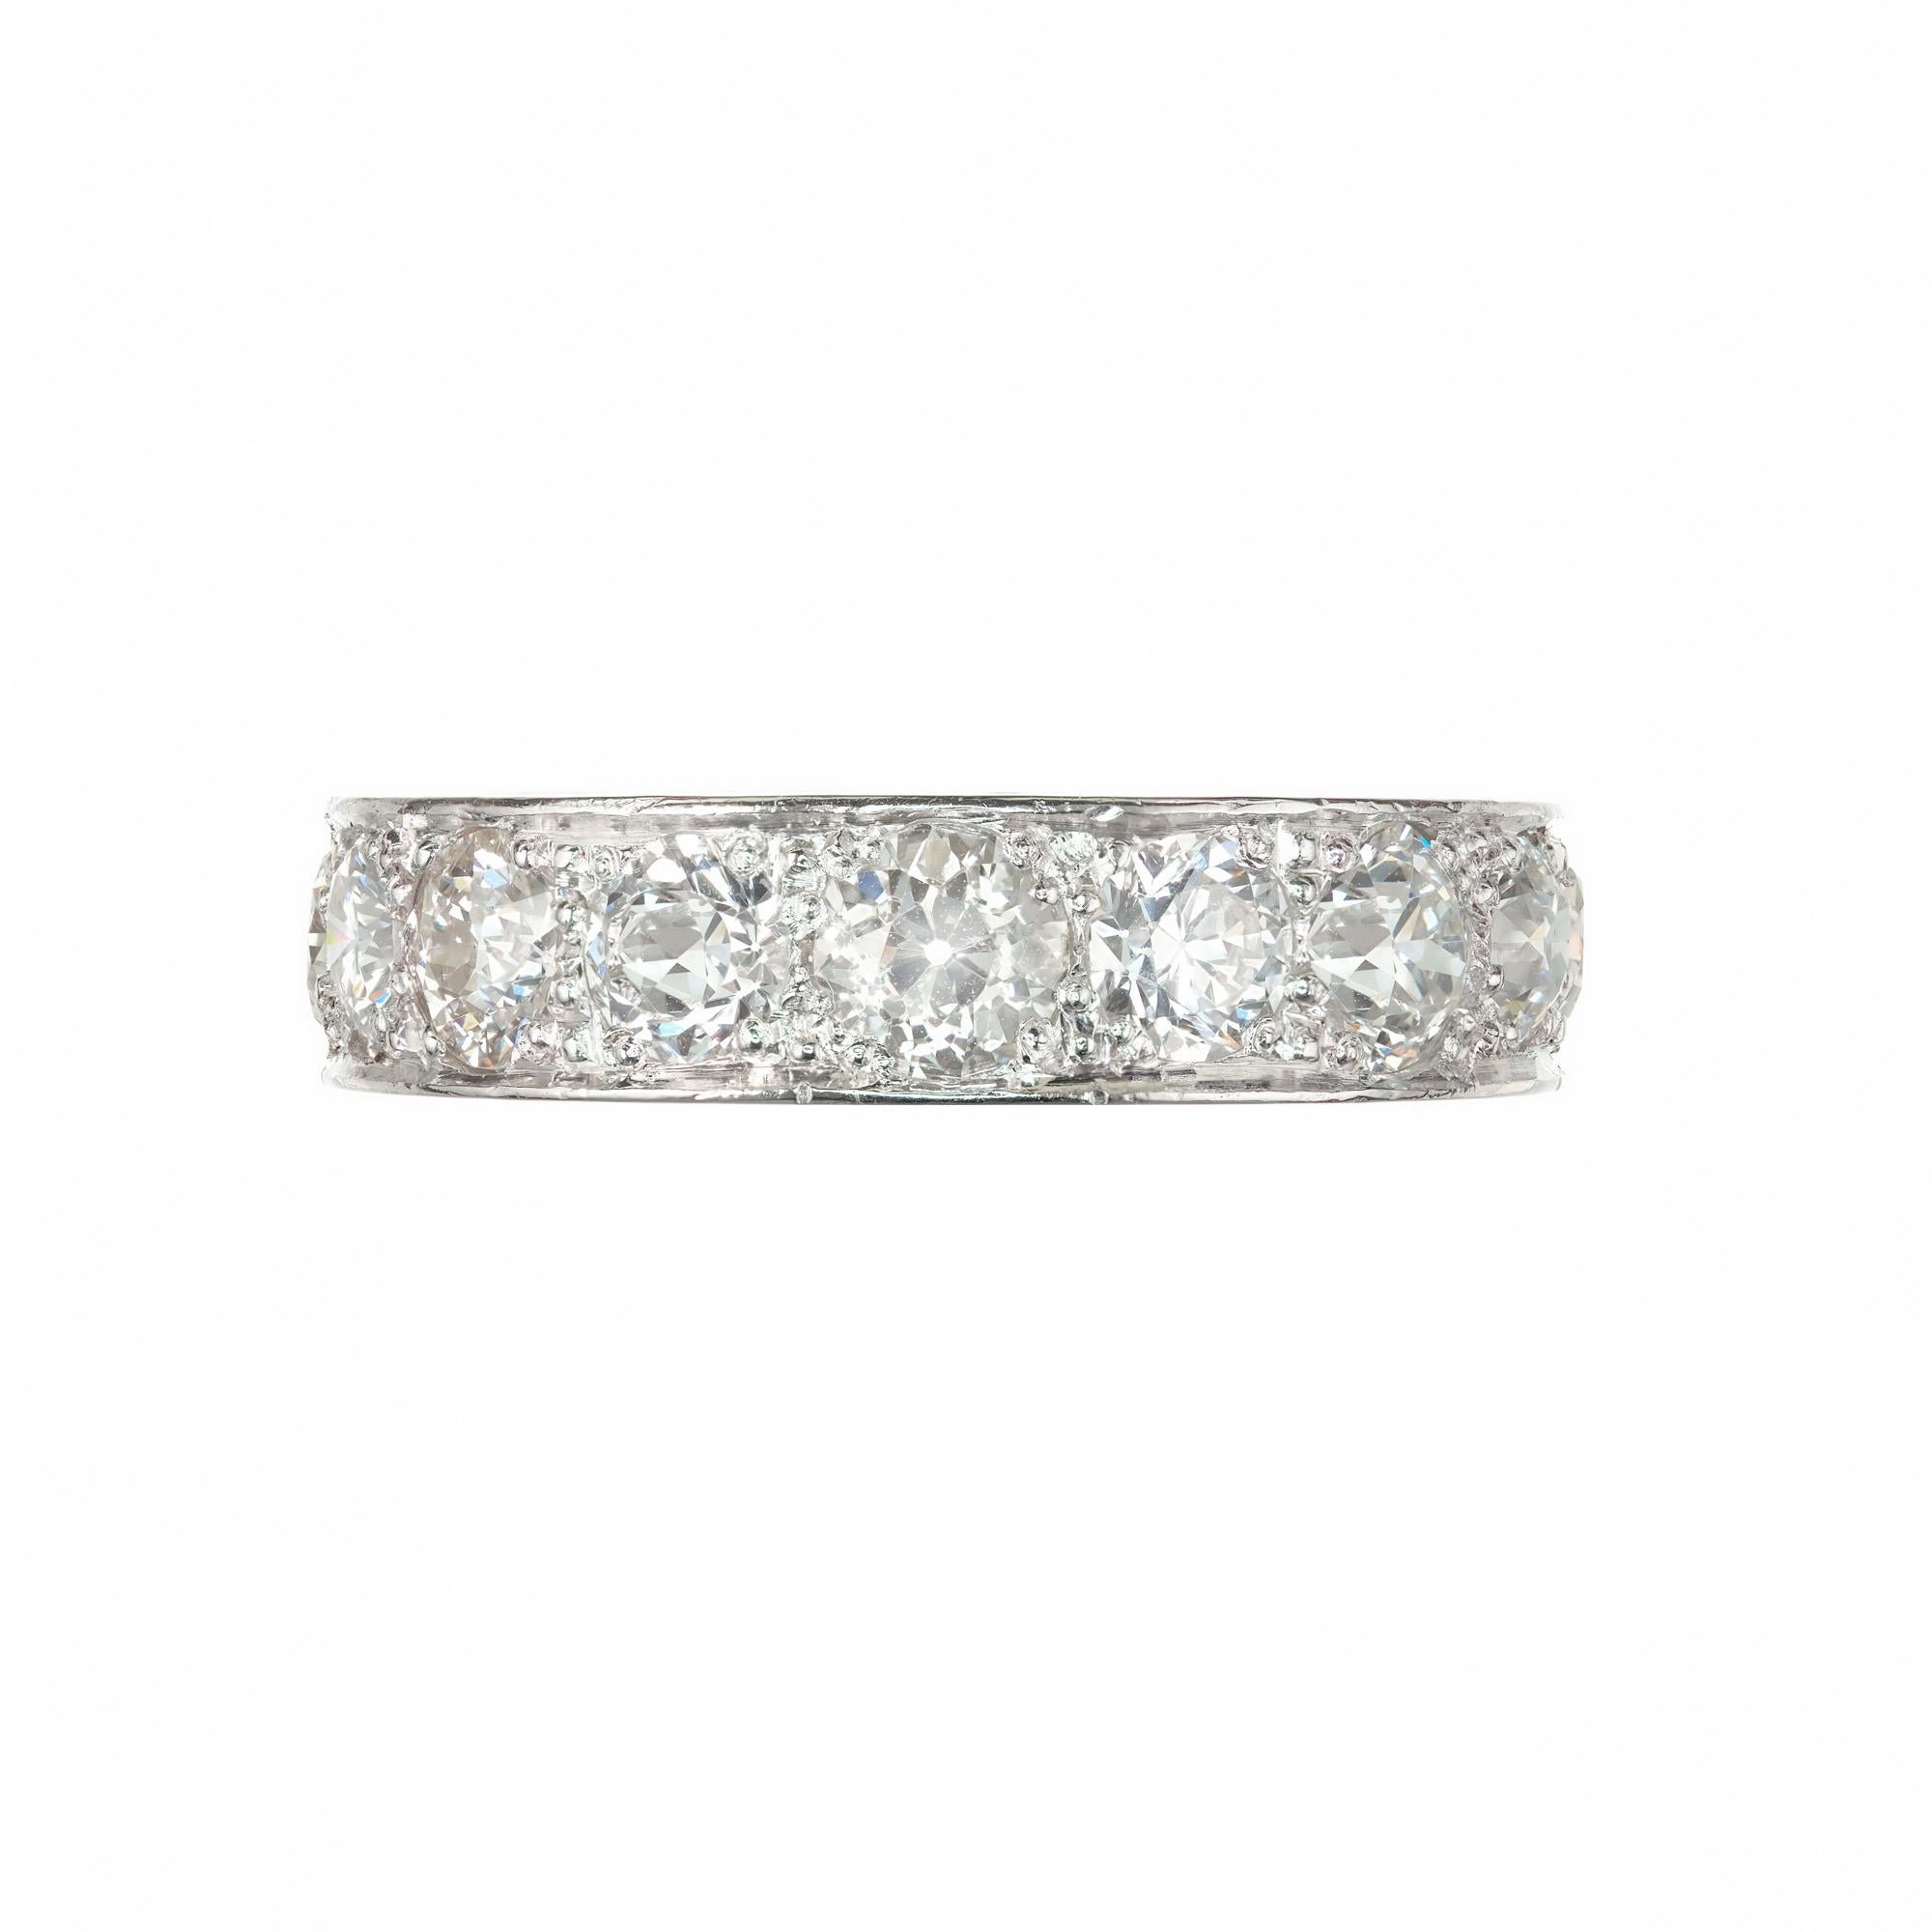 Peter Suchy vintage inspired platinum wedding band full ¾ of the way around band set with Old European cut bright sparkly diamonds. Hand engraved sides

11 Old European cut H-I-J VS-SI diamonds Approx. Total Weight 3.80cts
Size 7 and